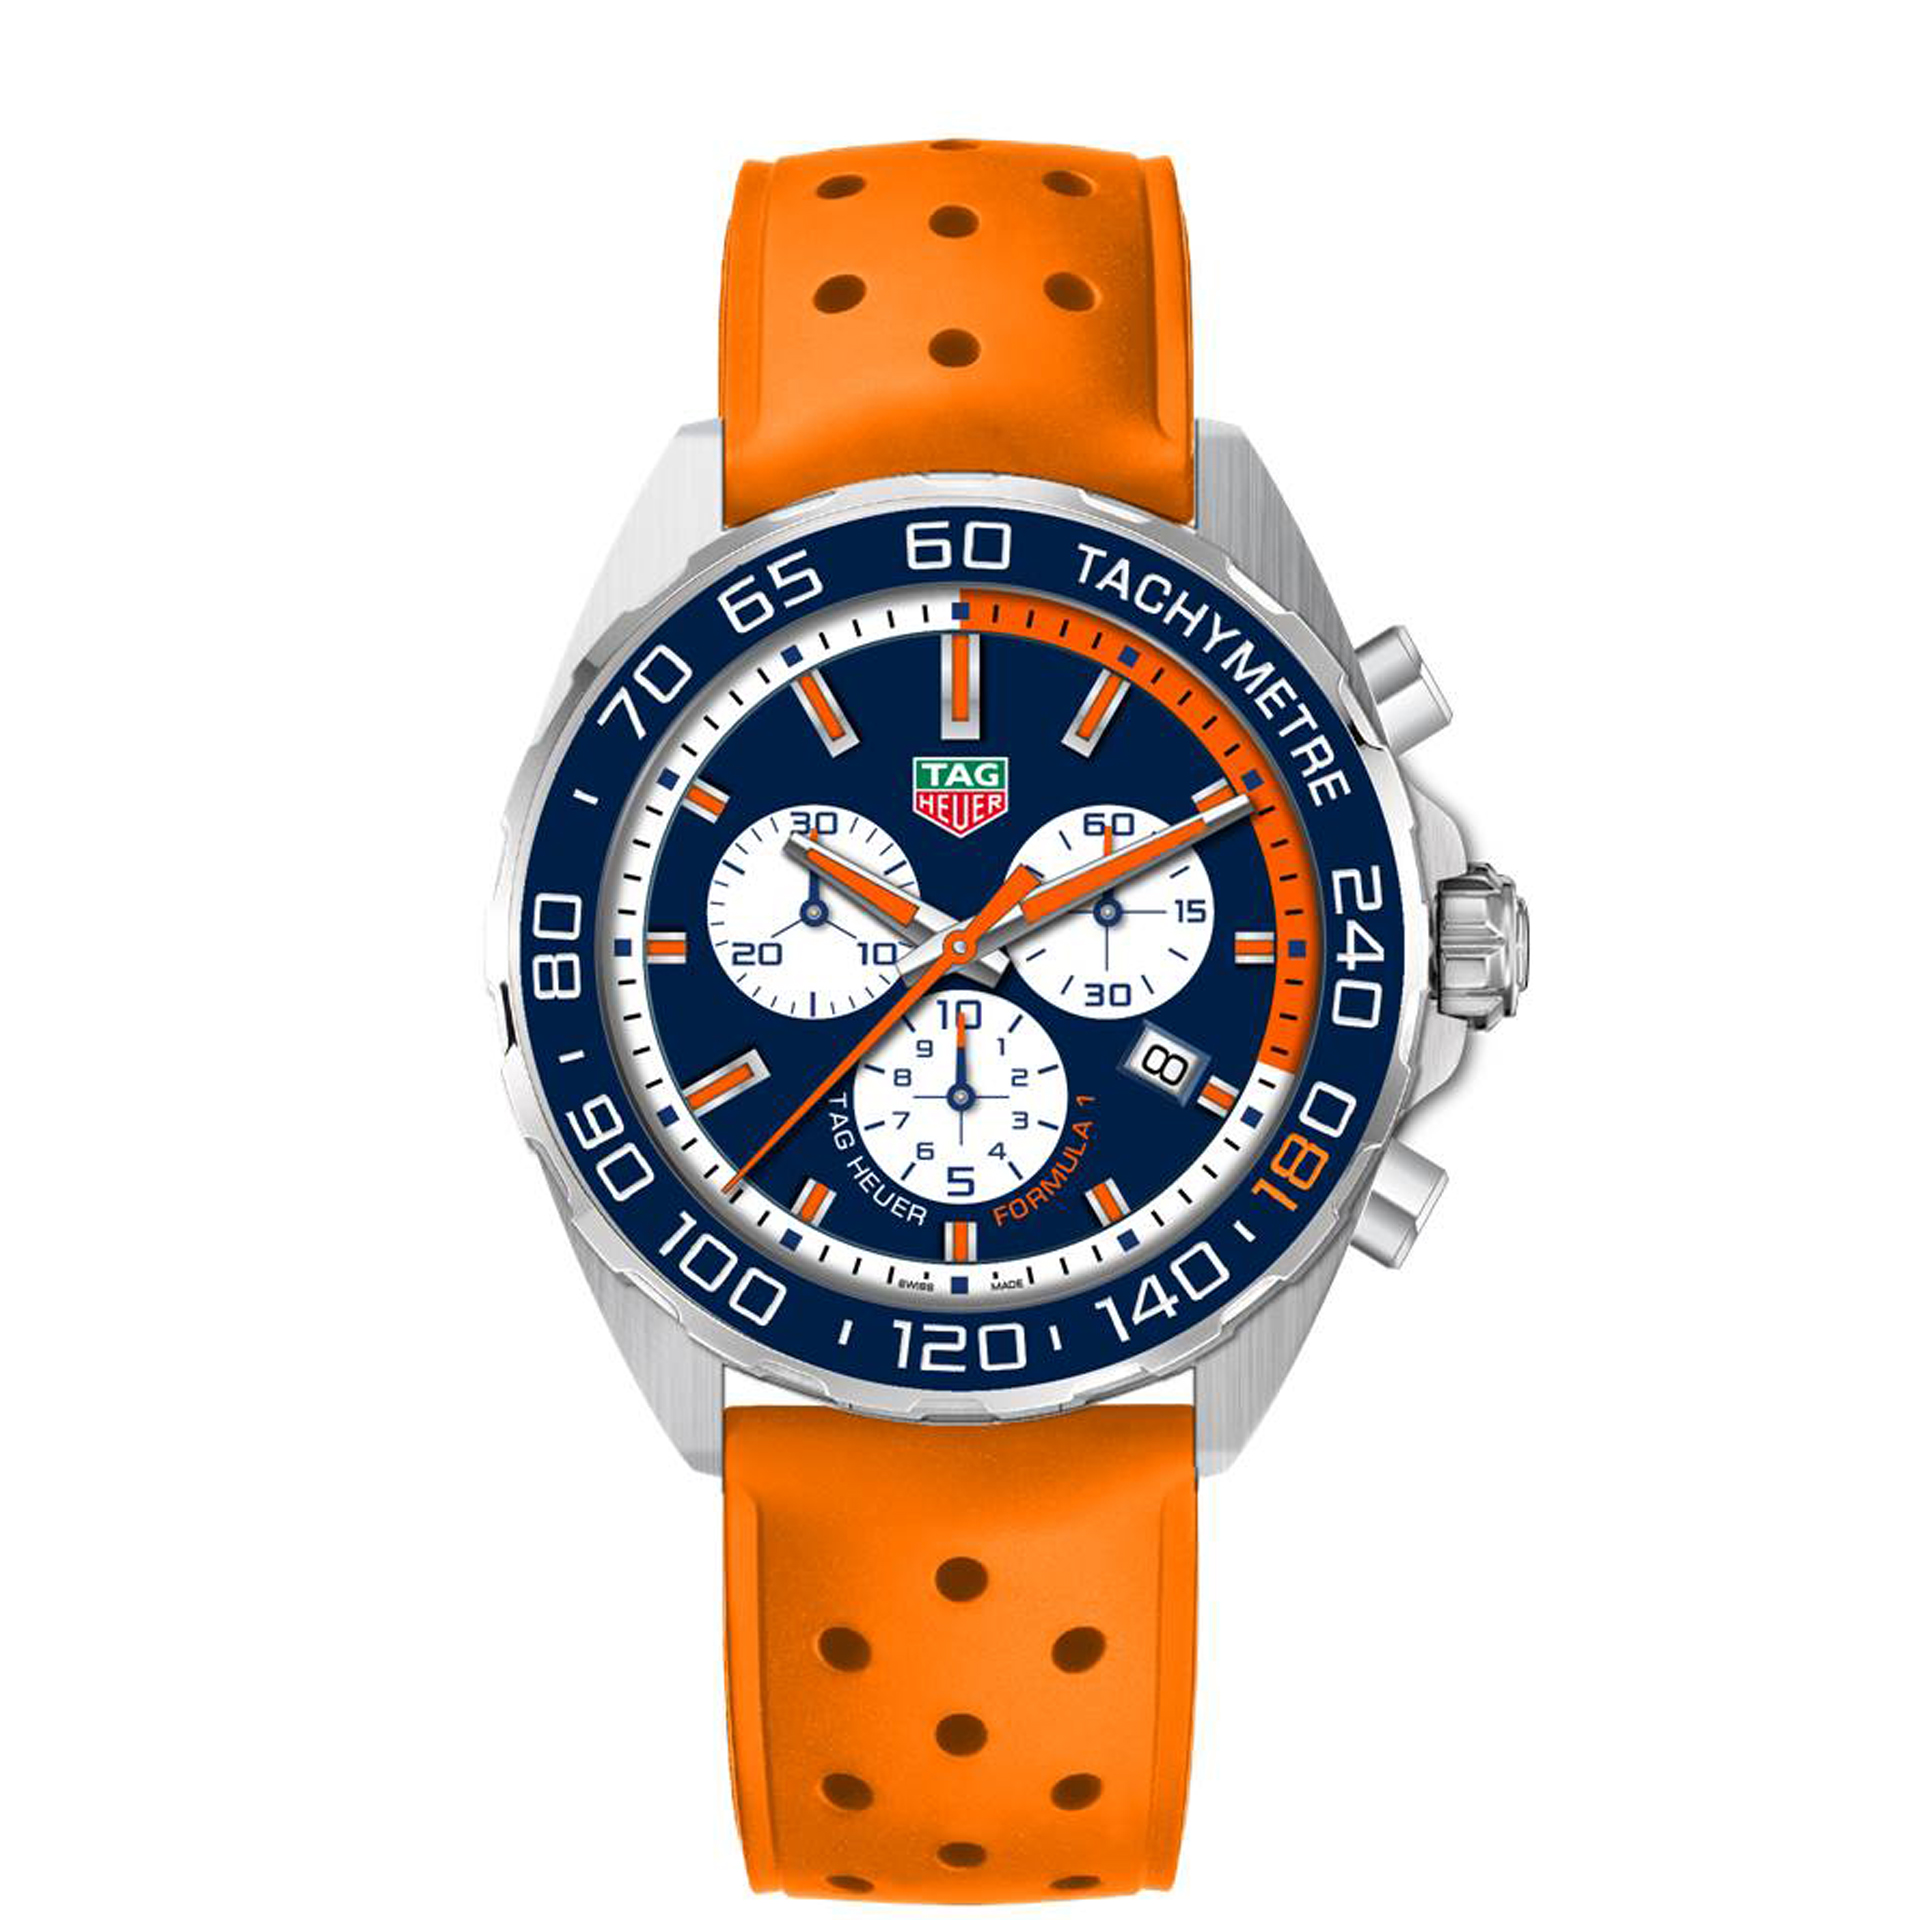 TAG Heuer Formula One Max Verstappen Youngest Grand Prix Winner Special Edition